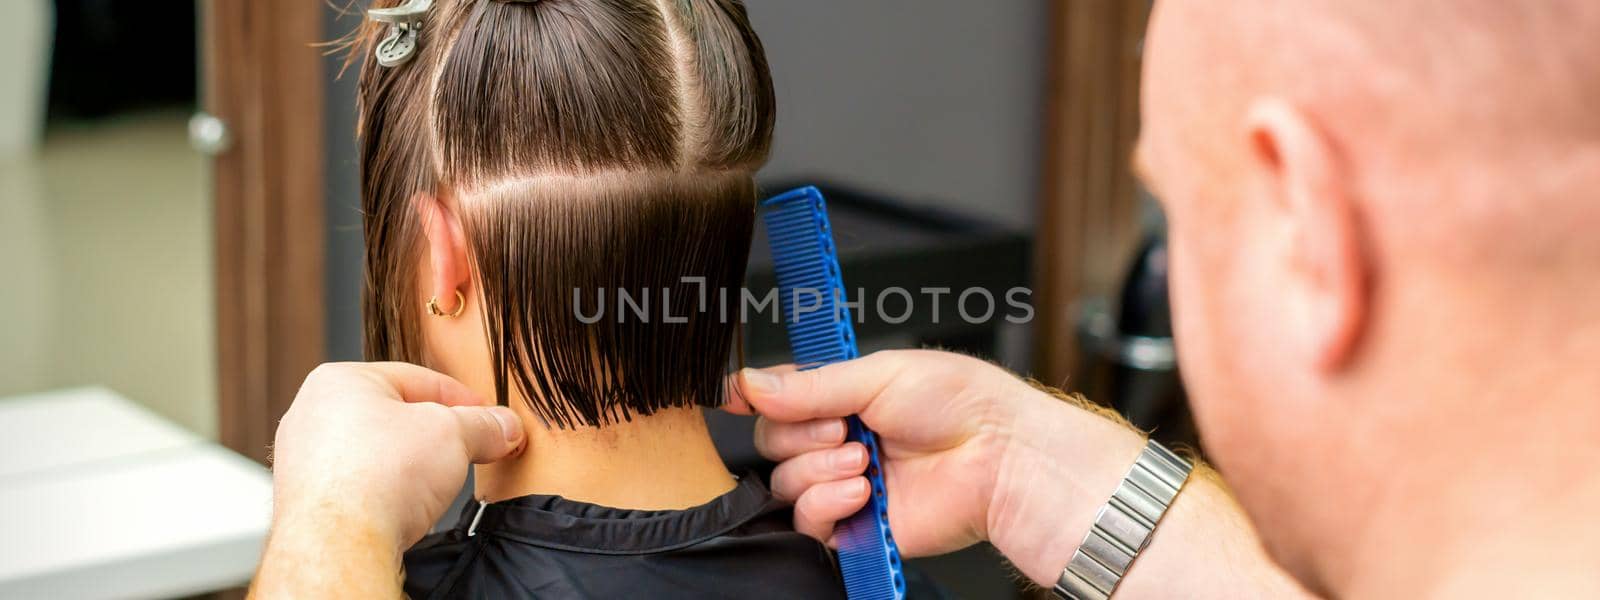 Male hairdresser cutting hair of young woman holding comb at hair salon. Rear view